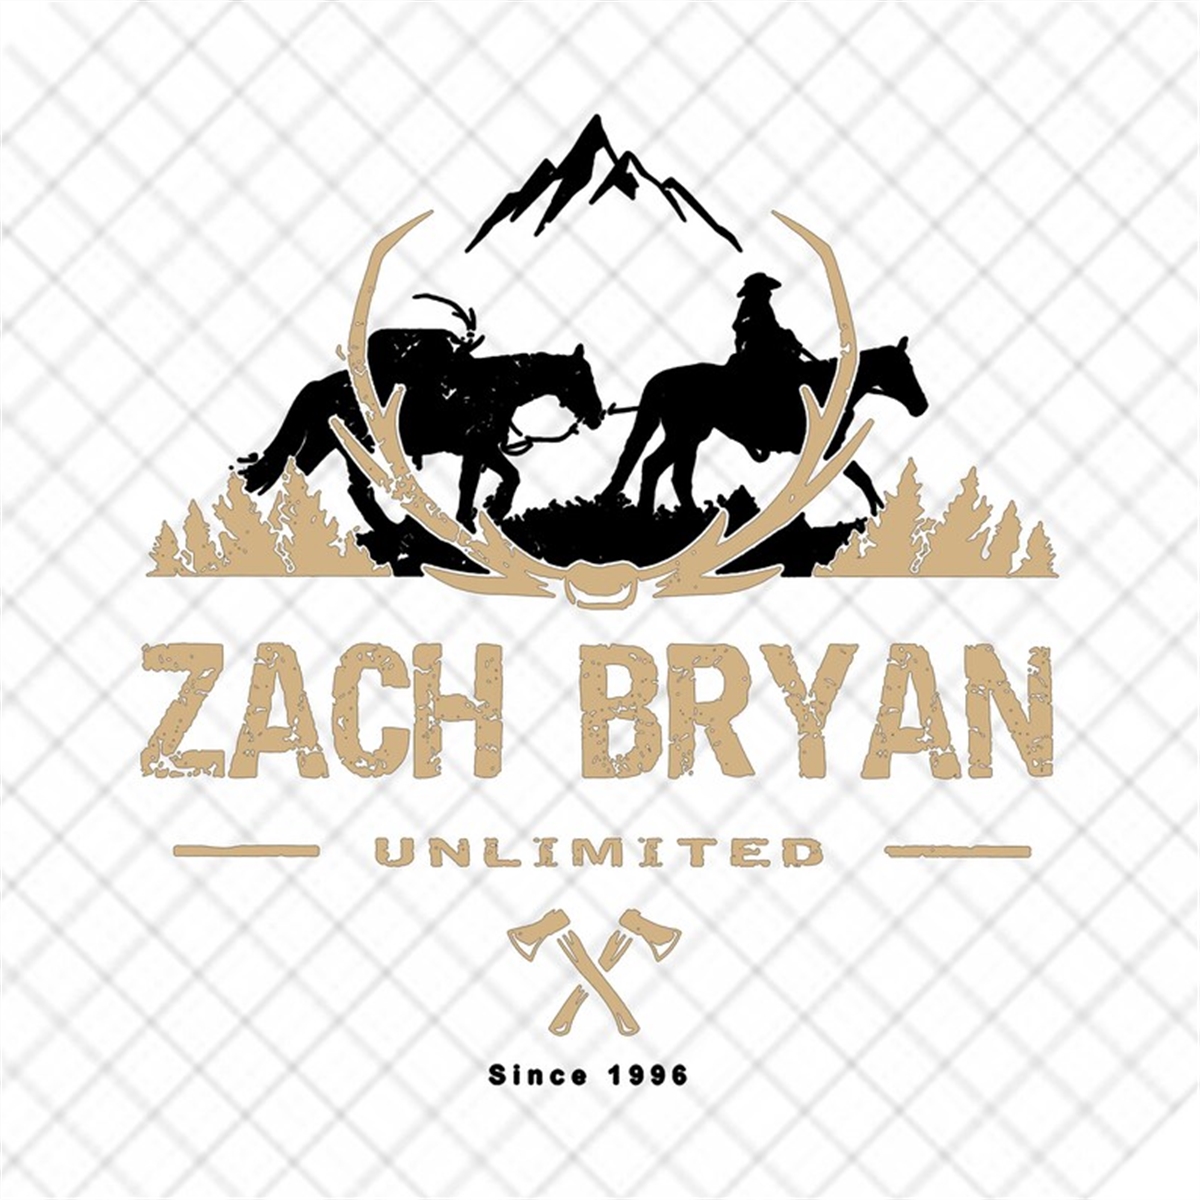 country-music-300dpi-digital-zach-bryan-png-find-someone-image-1